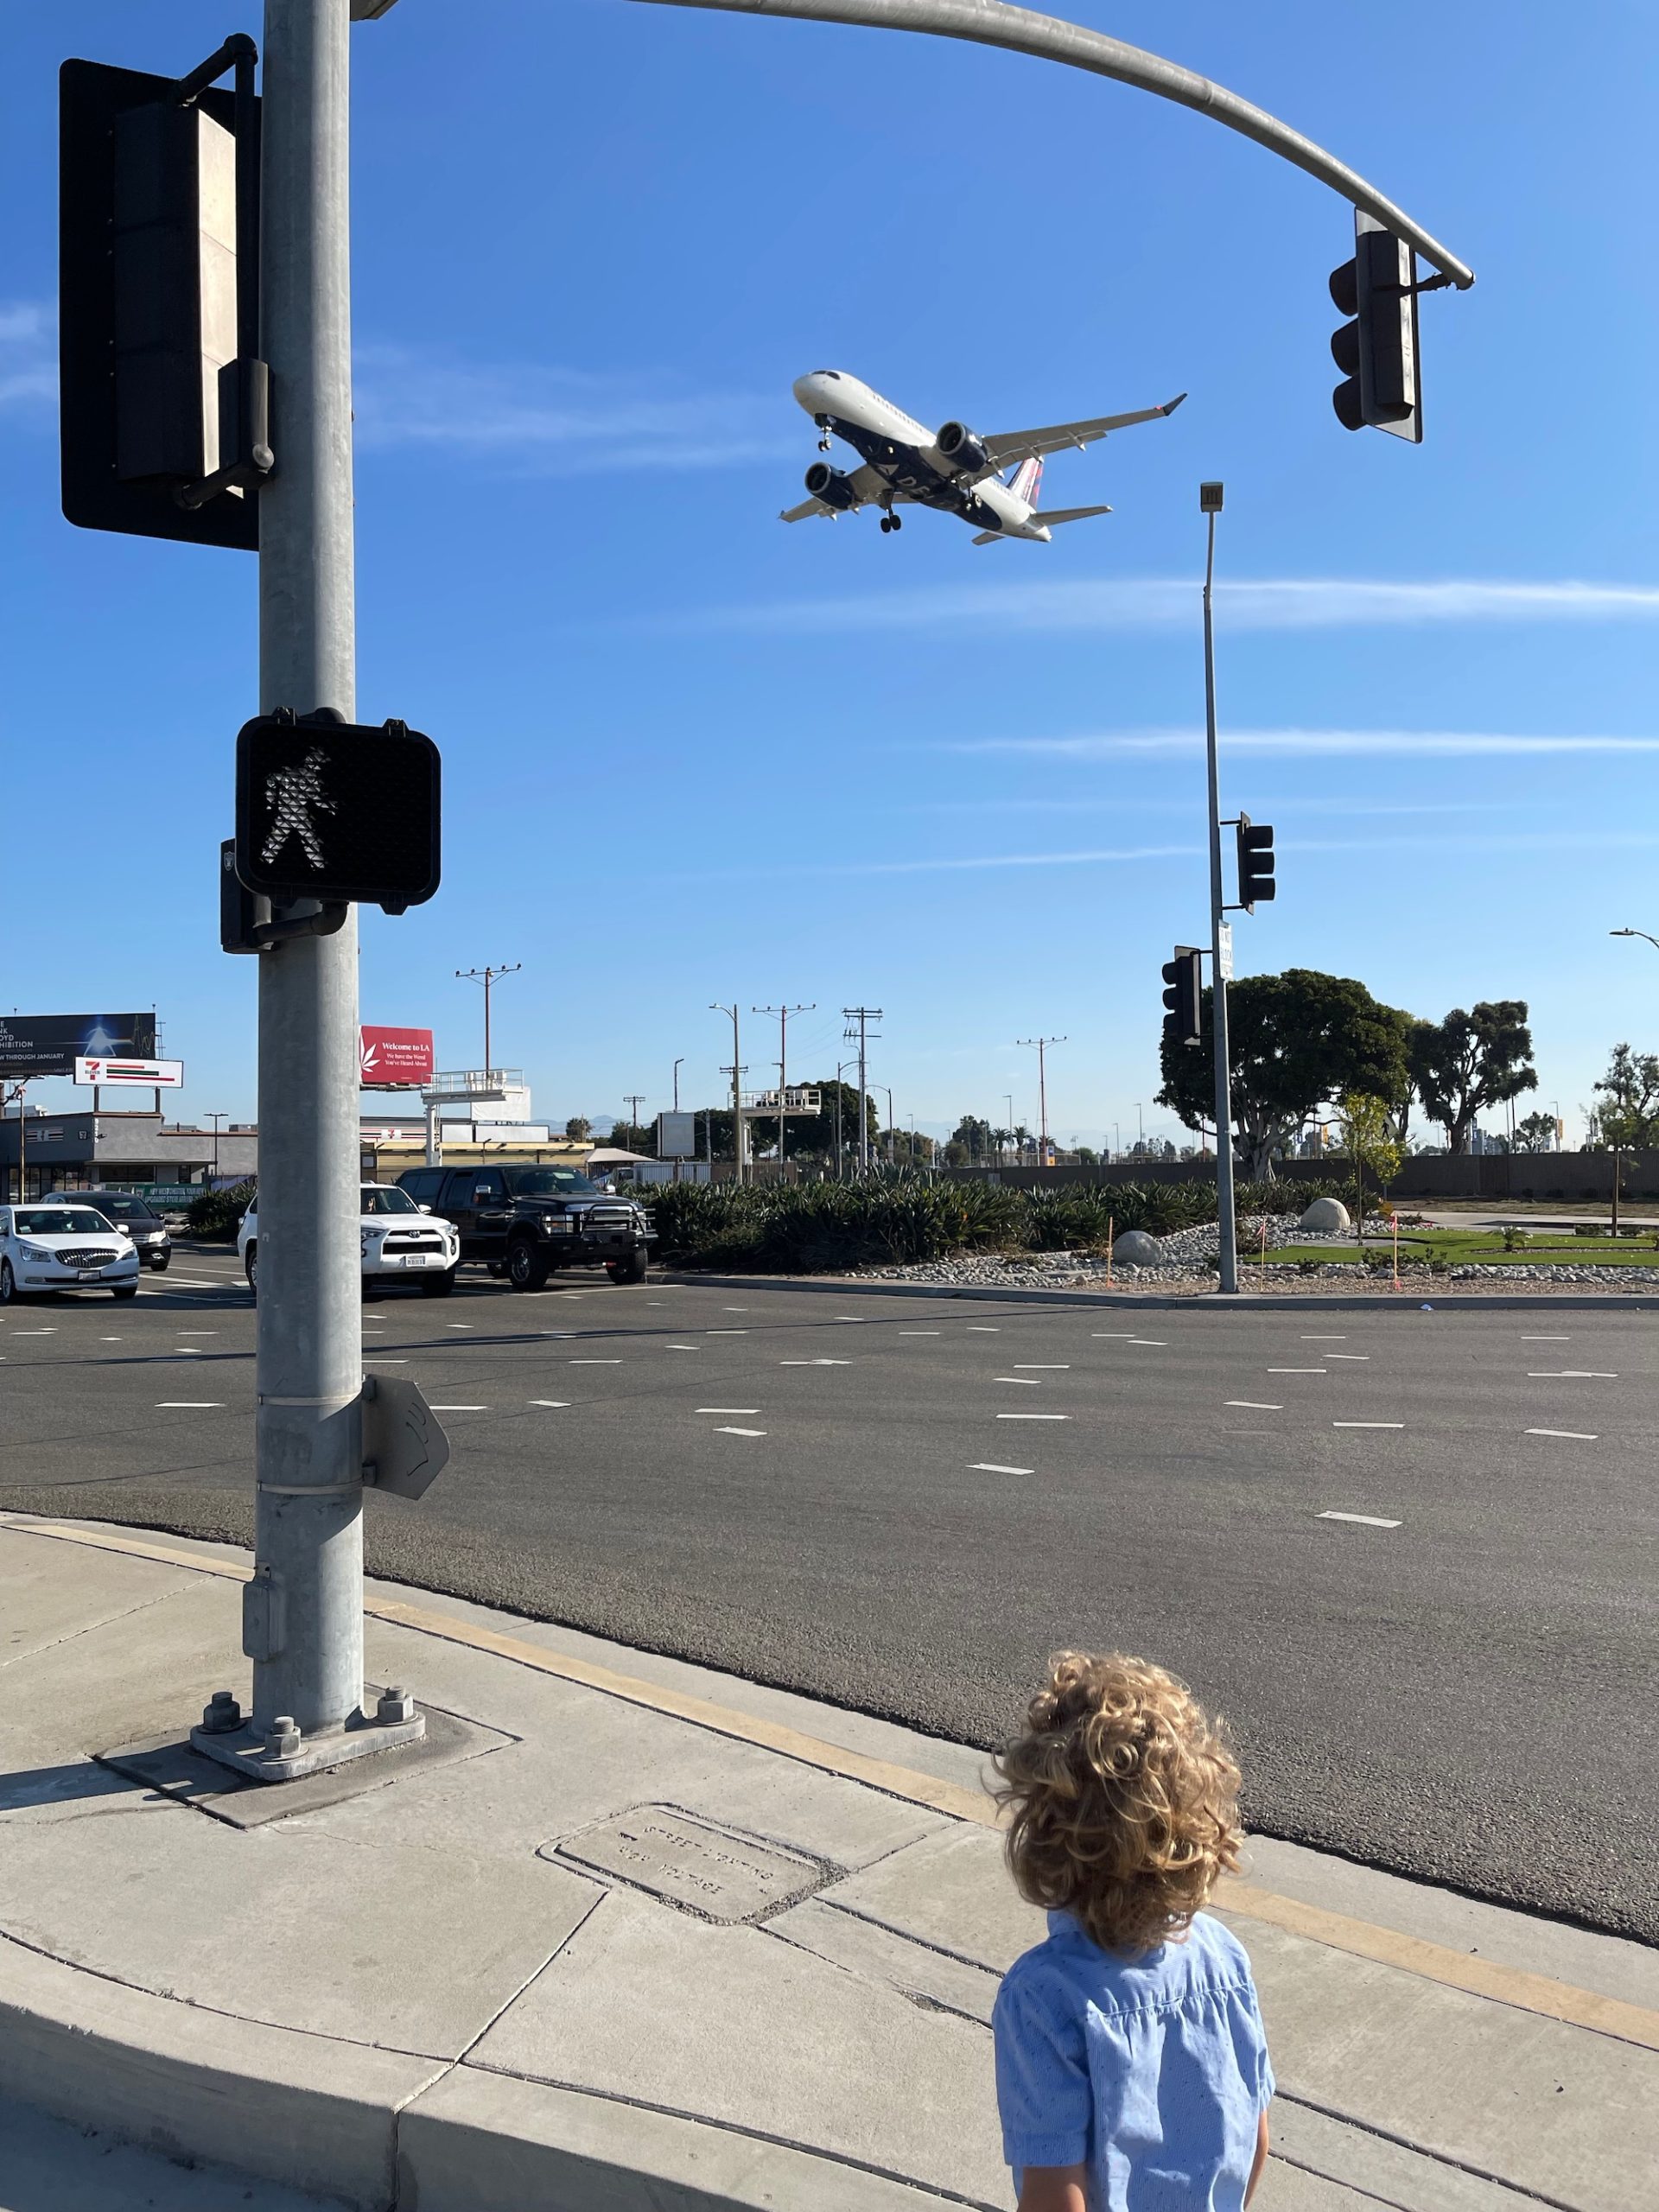 a child looking at an airplane flying over a street